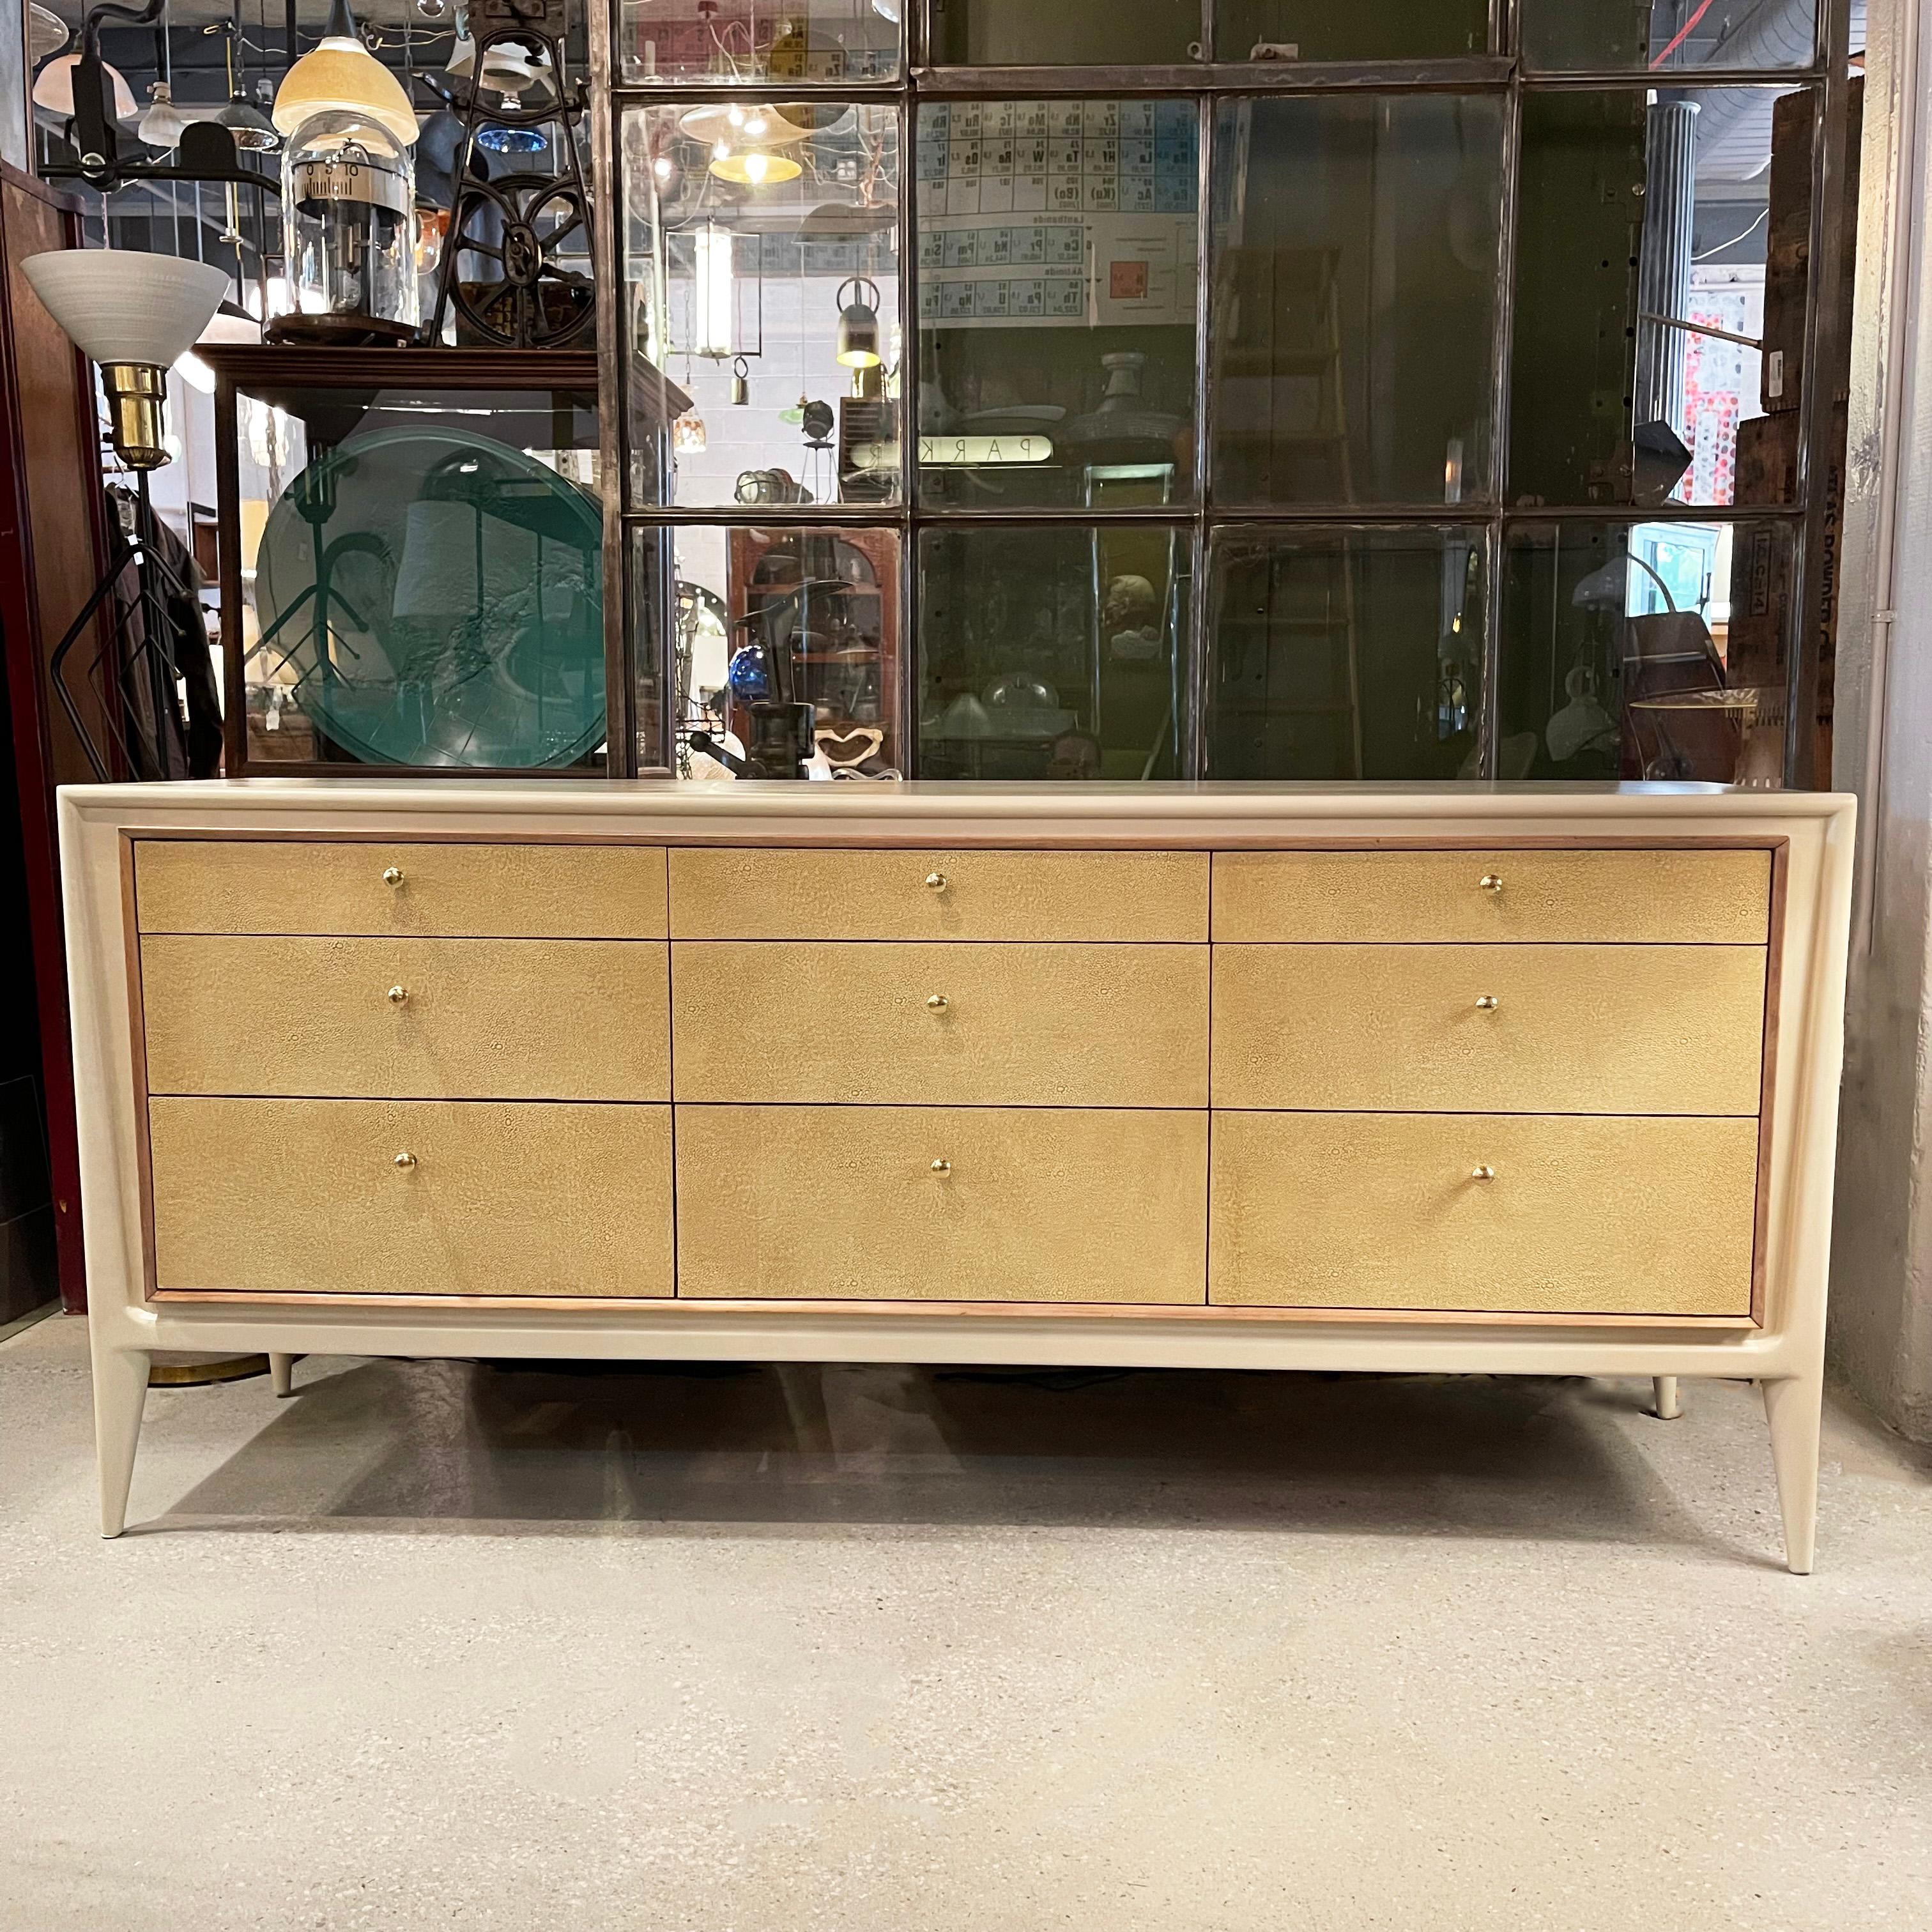 Mid-Century Modern, triple wide, walnut dresser by John Stuart, Facade features a surround lacquered in cream, drawer fronts covered in tan shagreen leather with brass pulls and a natural mahogany trim. The custom finish really pronouces all the